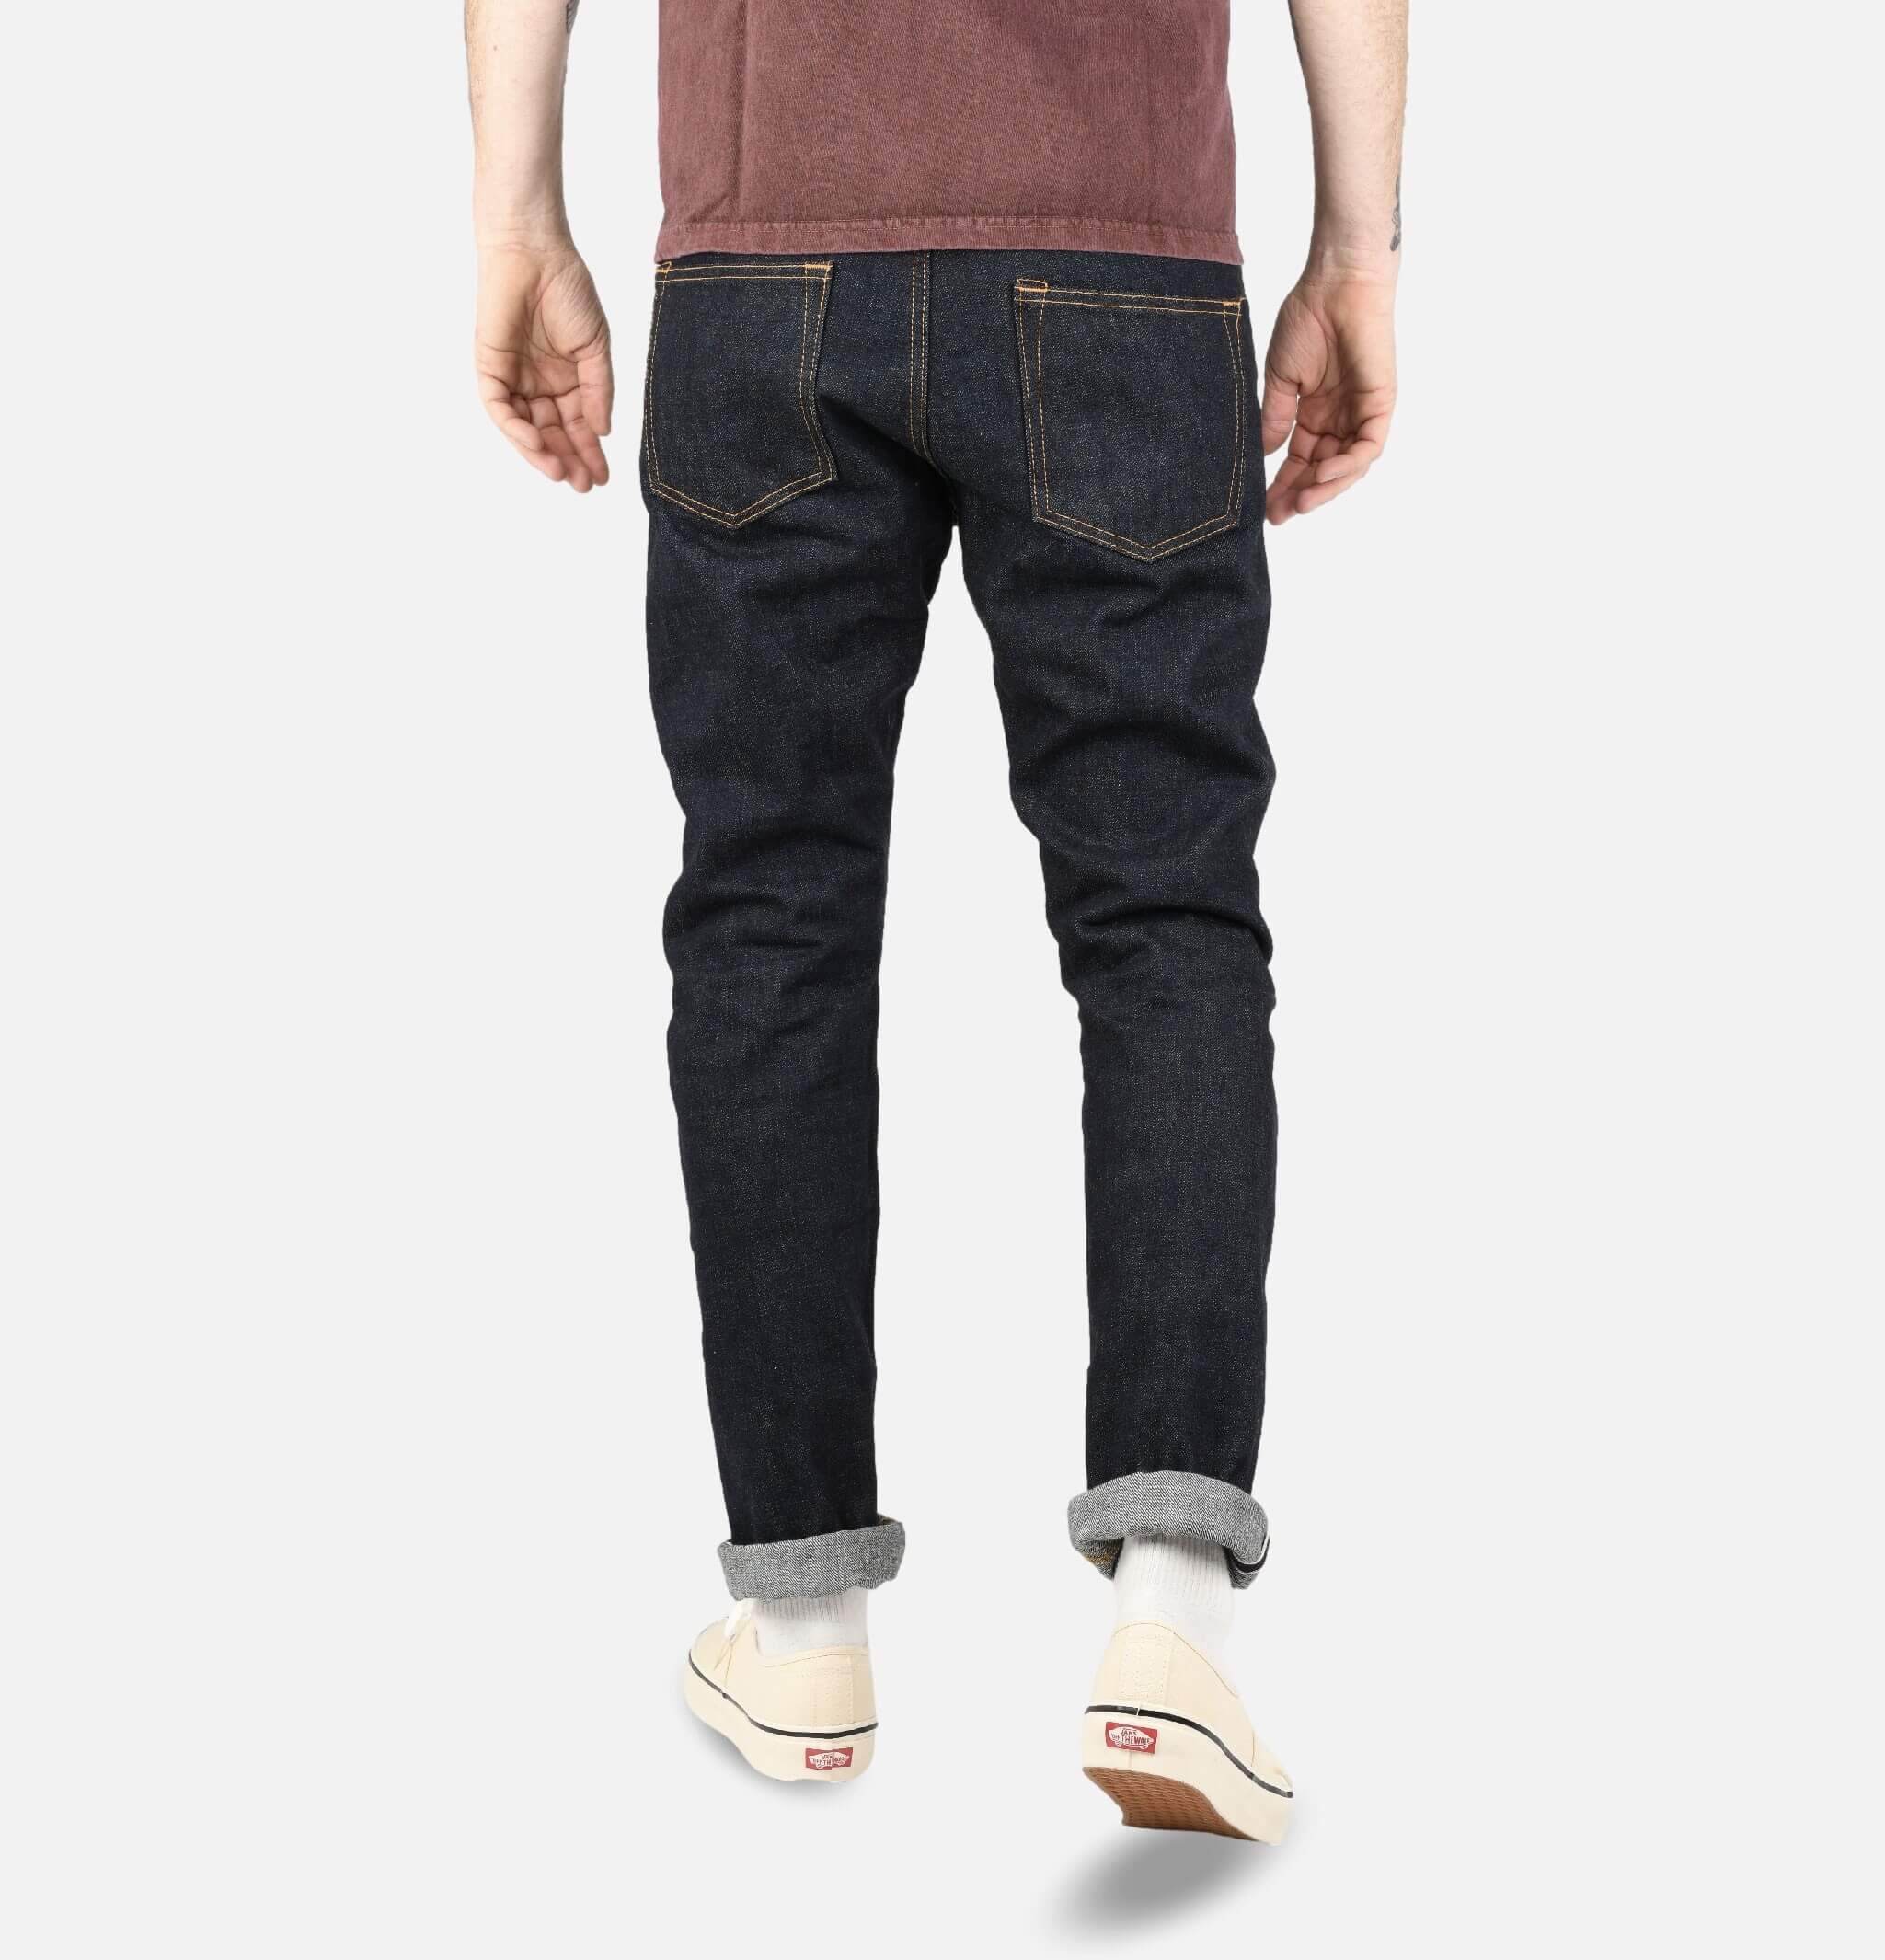 Jean 201 Tapered 14.8 US Selvedge